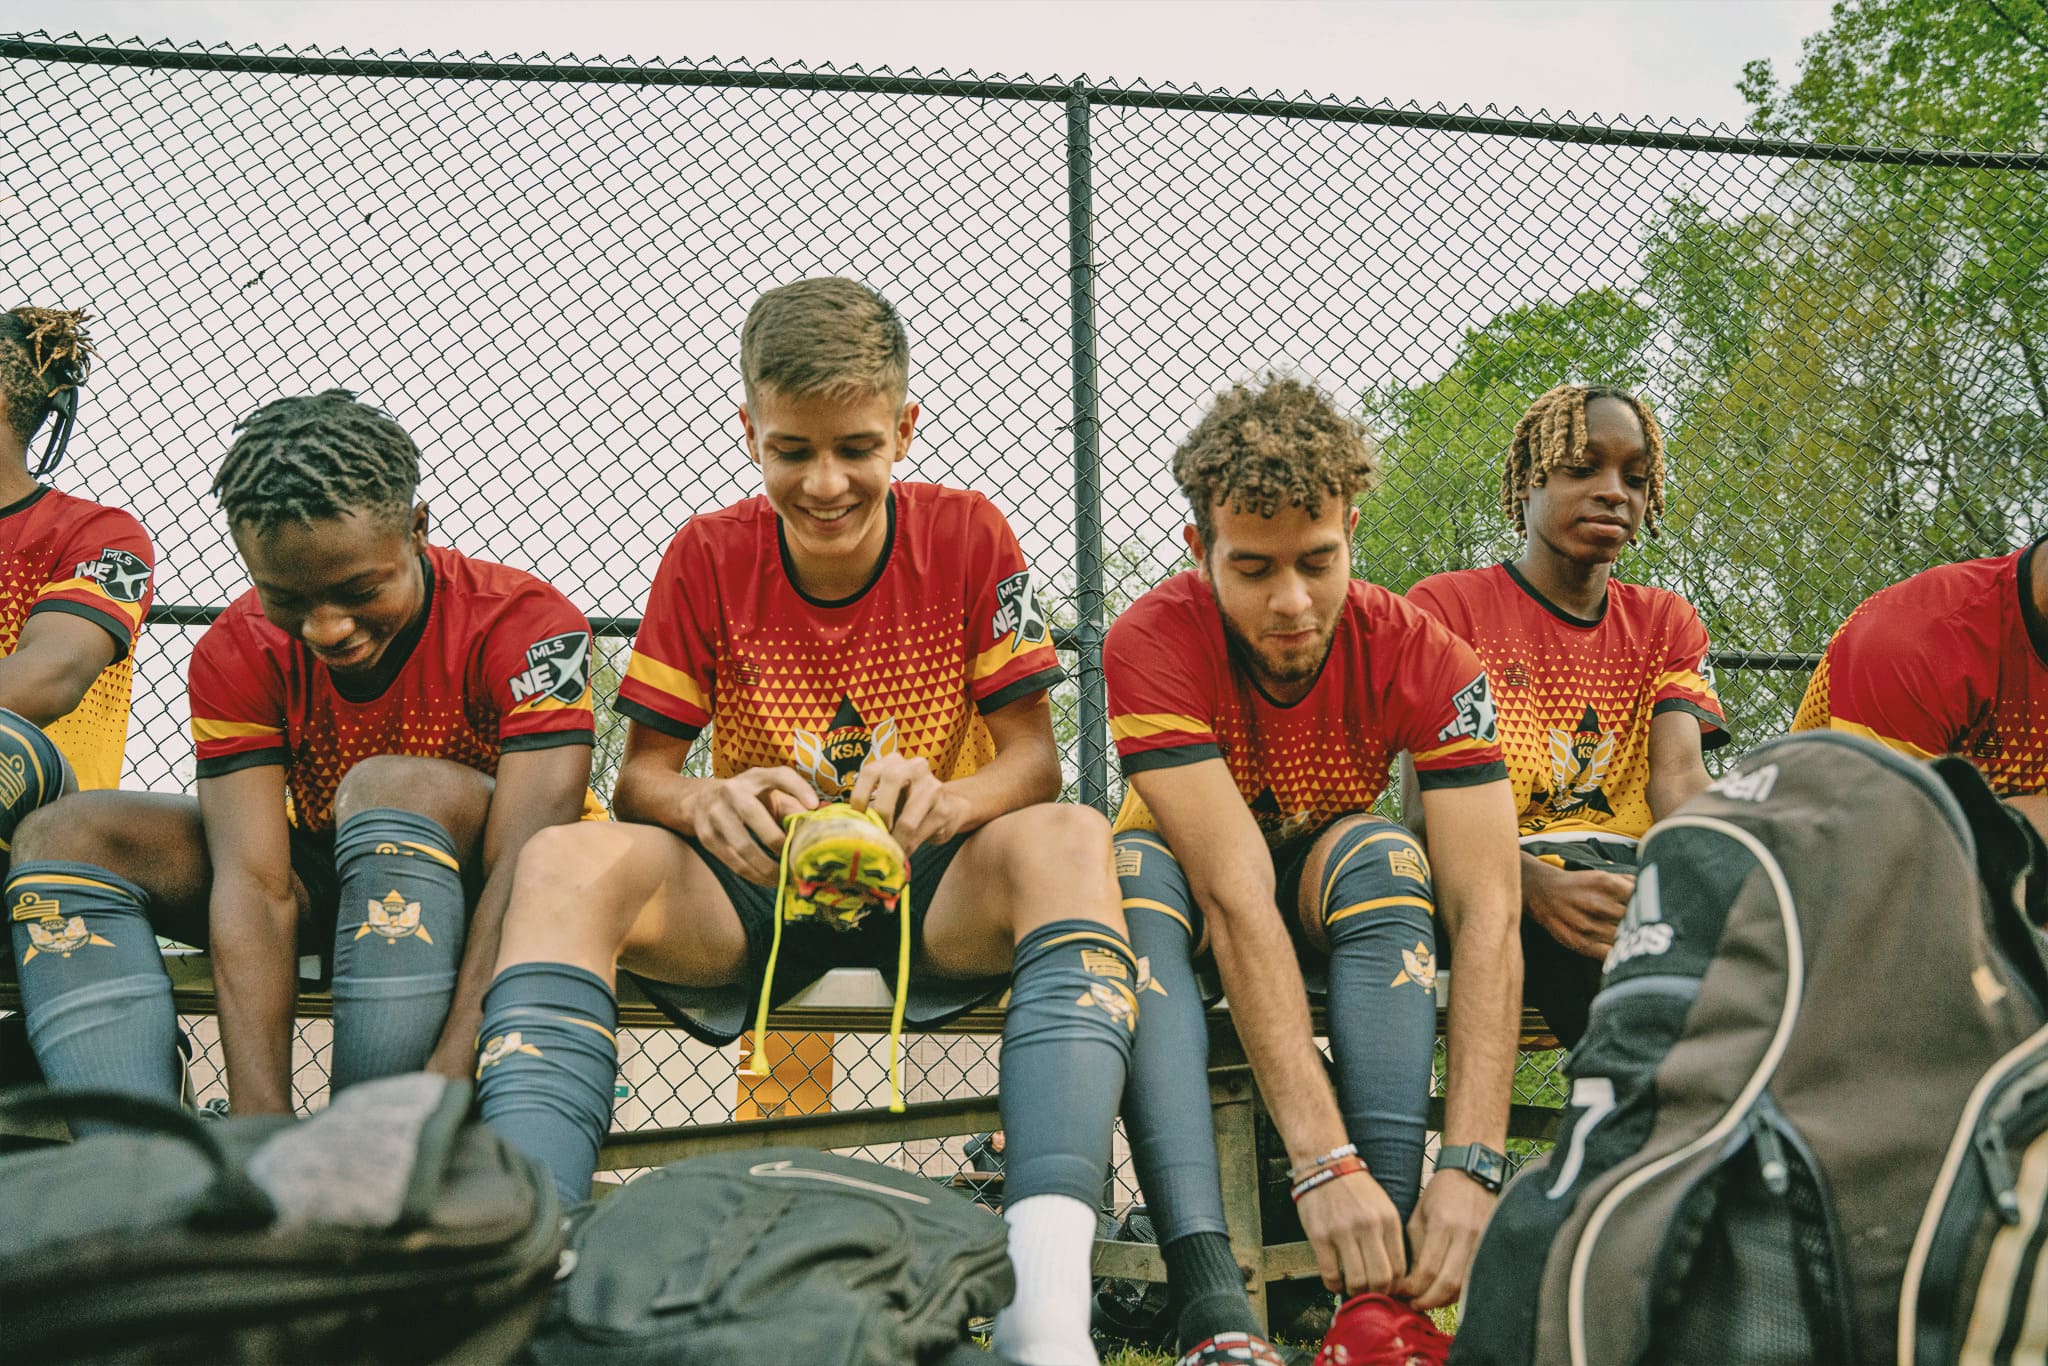 Young soccer players getting ready for a match